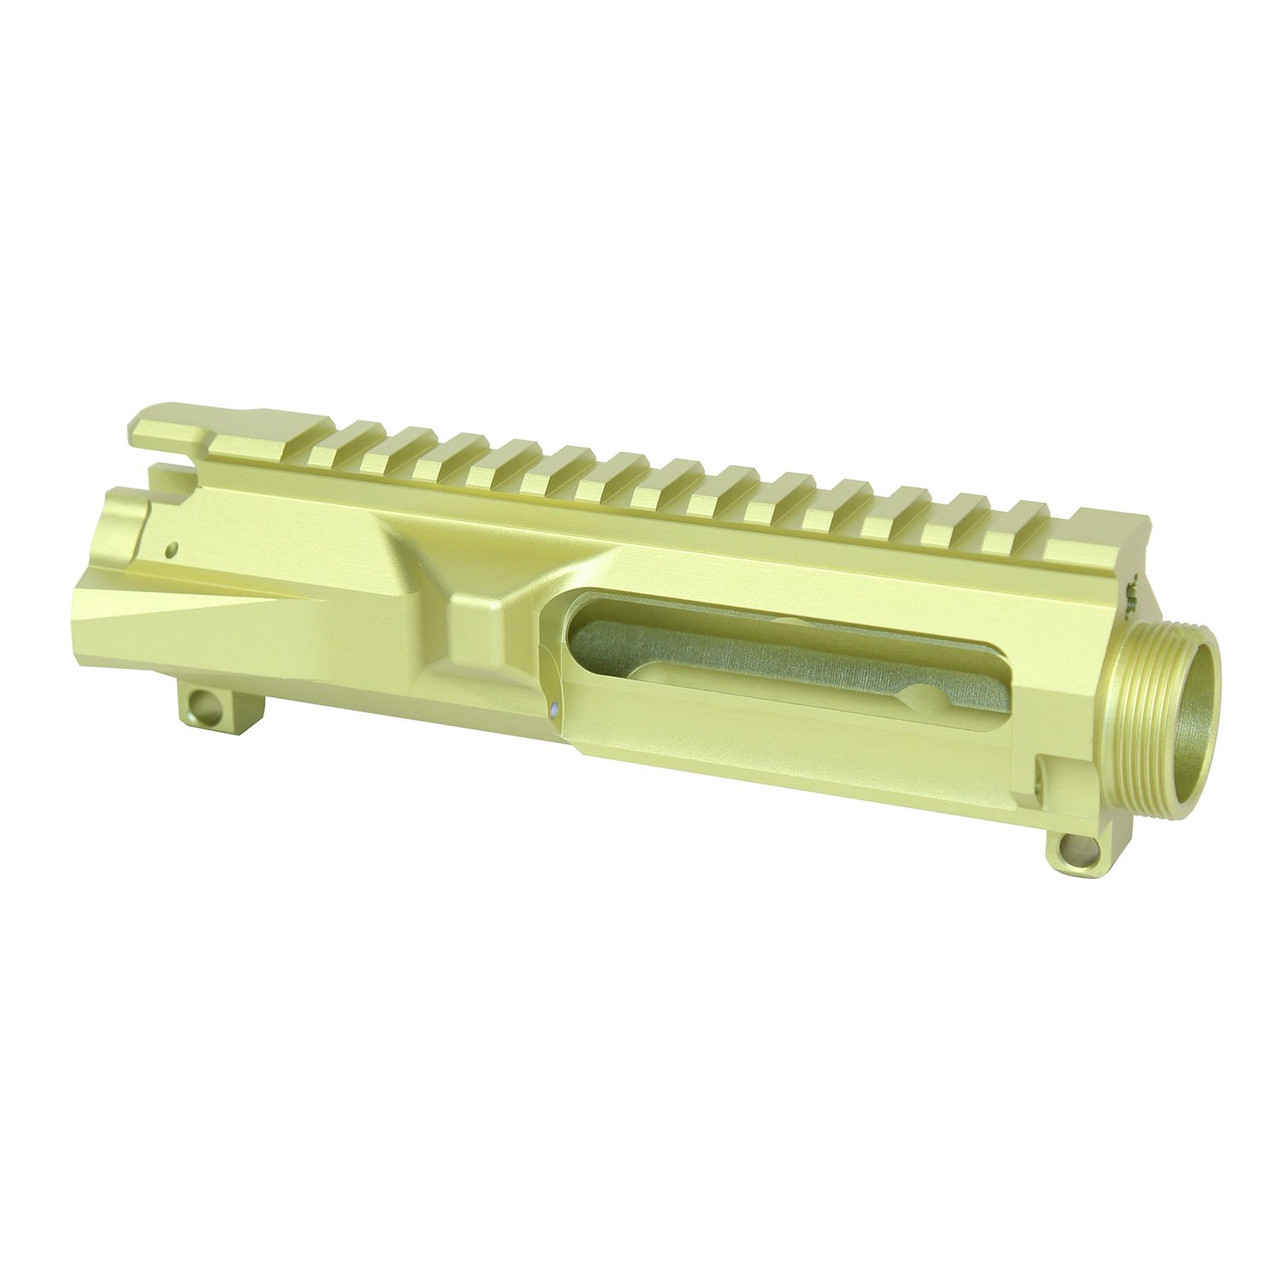 Guntec USA GT-UPPER-NY AR-15 Stripped Billet Upper Receiver (Anodized Neon Yellow)